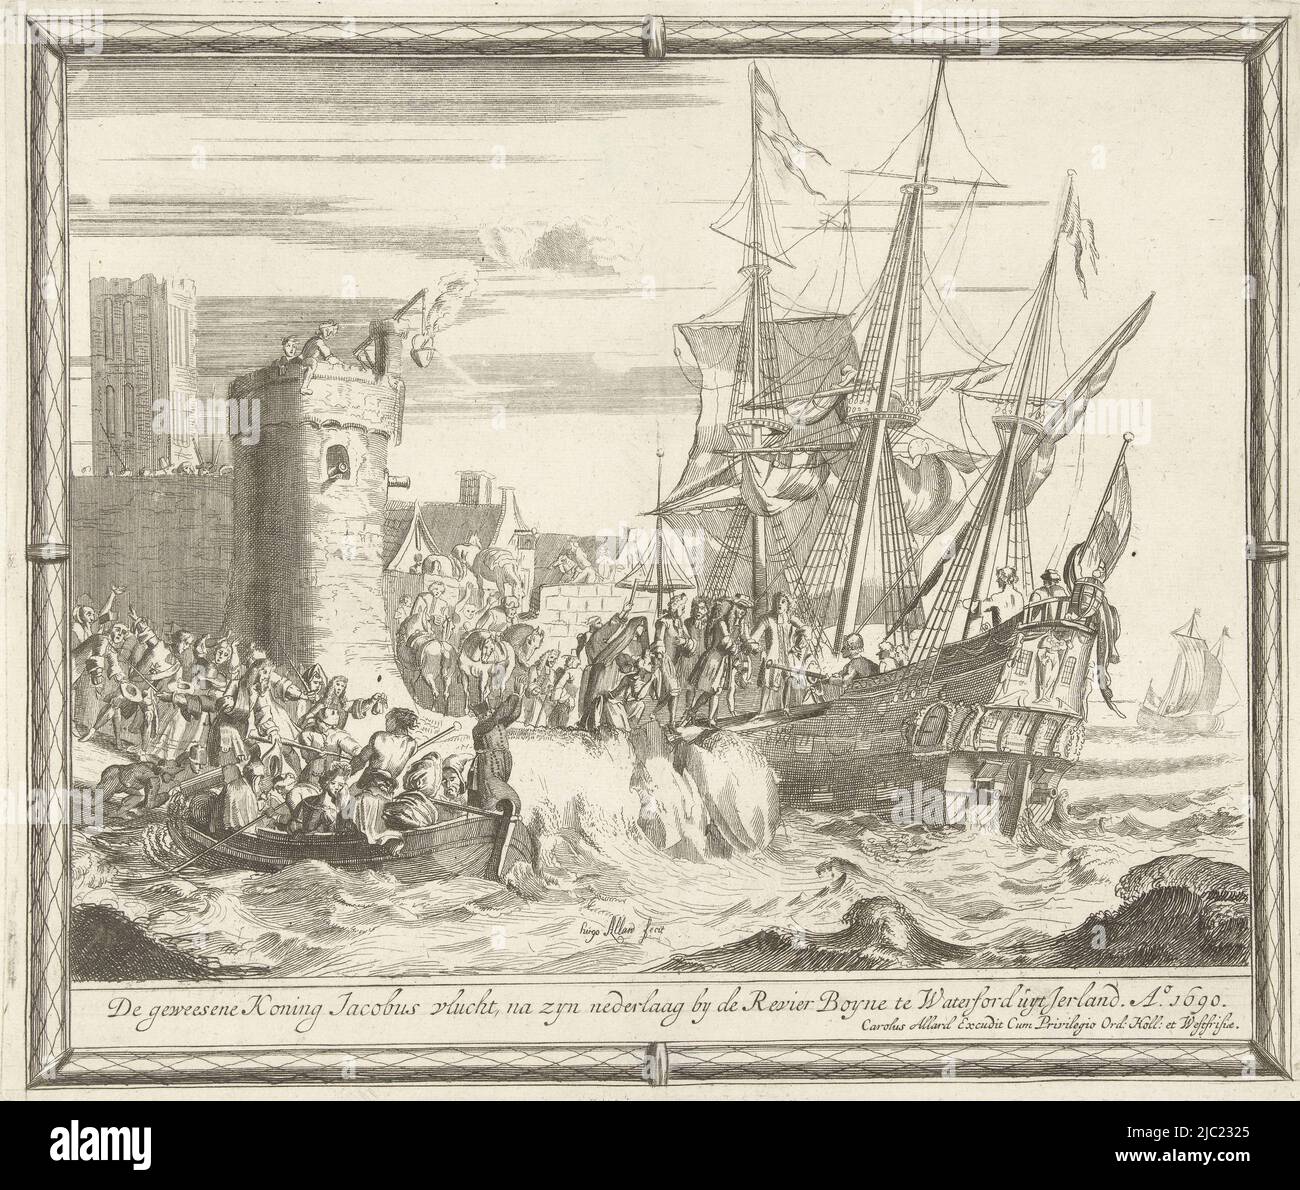 Flight of King James to France on July 12, 1690 after his defeat against William III's army at the Battle of the Boyne. The king boards a ship in Waterford. Plate 16 in a series of 20 plates on the Glorious Revolution in England in the years 1688-1691, Flight of James after his defeat at the Boyne, 1690 The geweesene King James flees, after his defeat by the Revier Boyne at Waterford uyt Ireland. Ao. 1690 (title on object) History of the revolution in England 1688-1691 in 20 plates (series title), print maker: Hugo Allard (I), (mentioned on object), publisher: Carel Allard, (mentioned on Stock Photo